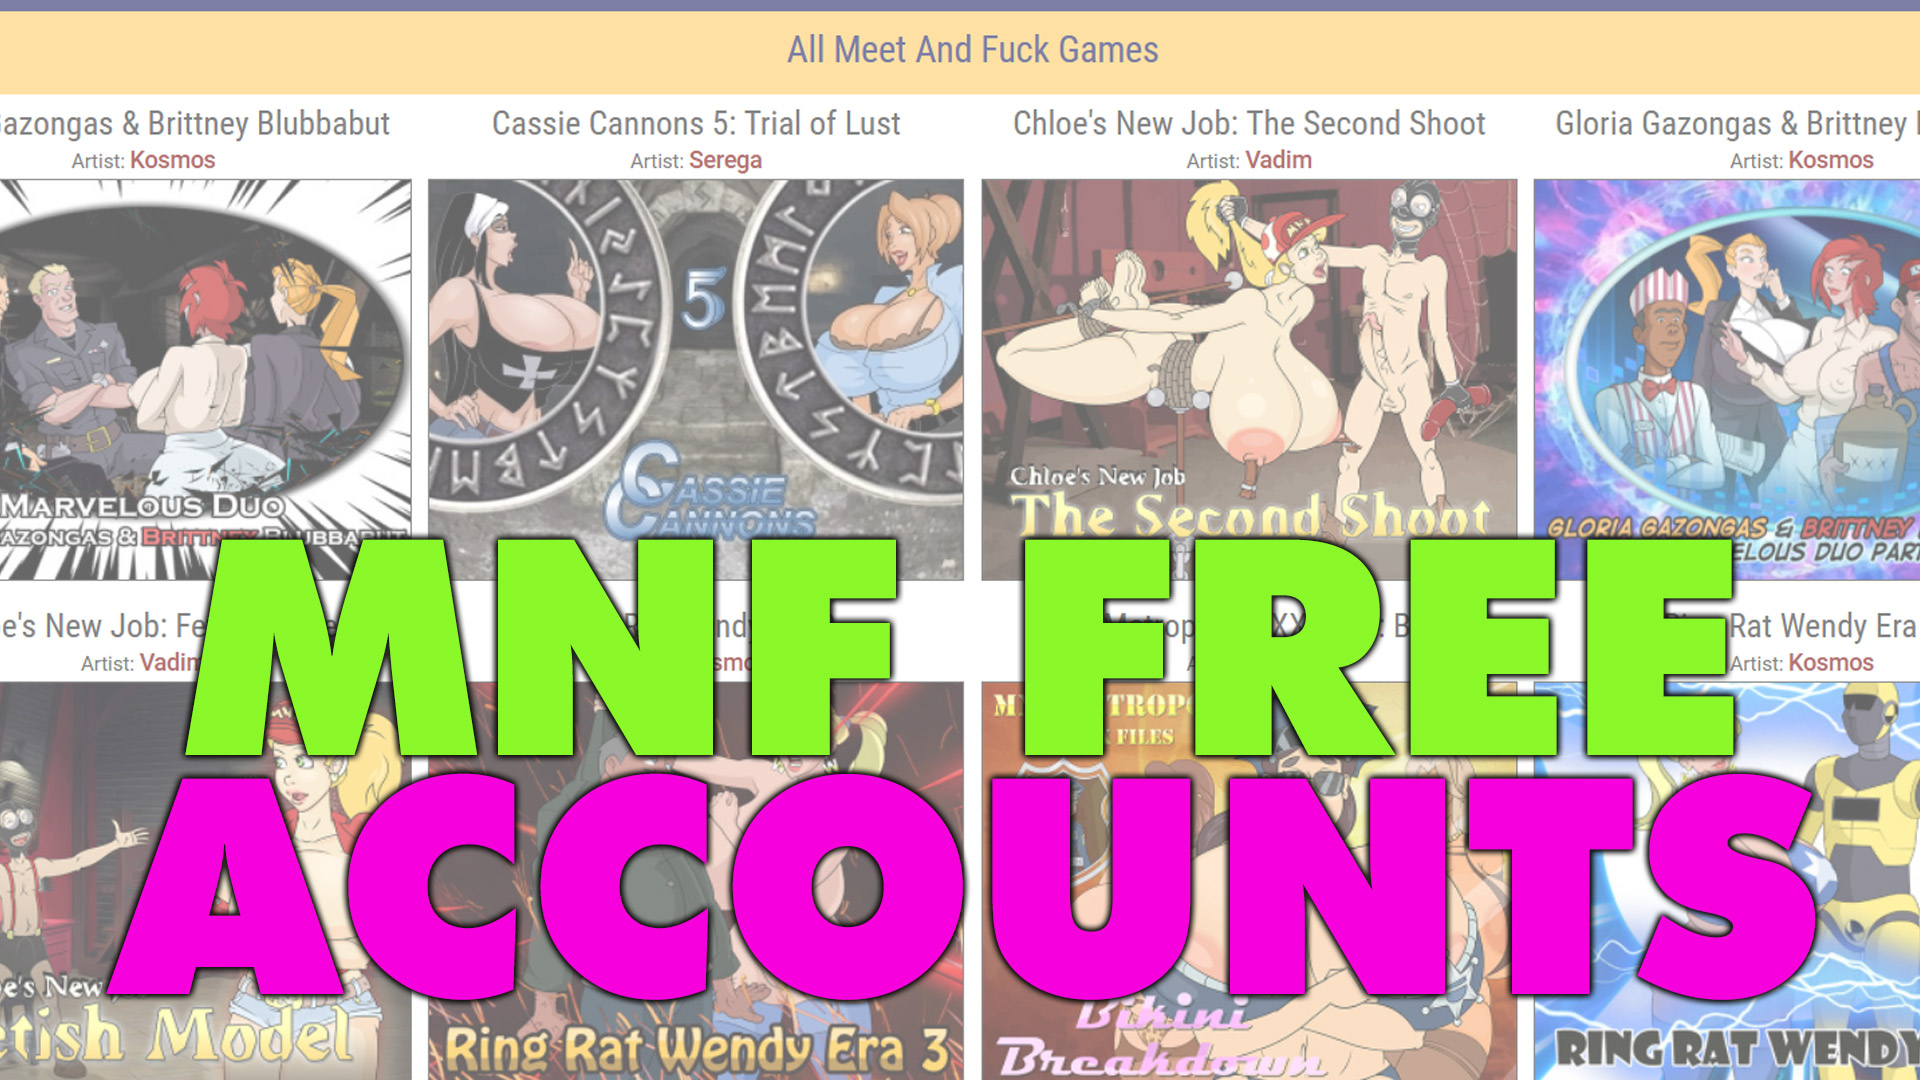 MEET-and-fuck-games-premium-free-accounts-access-2022-offer